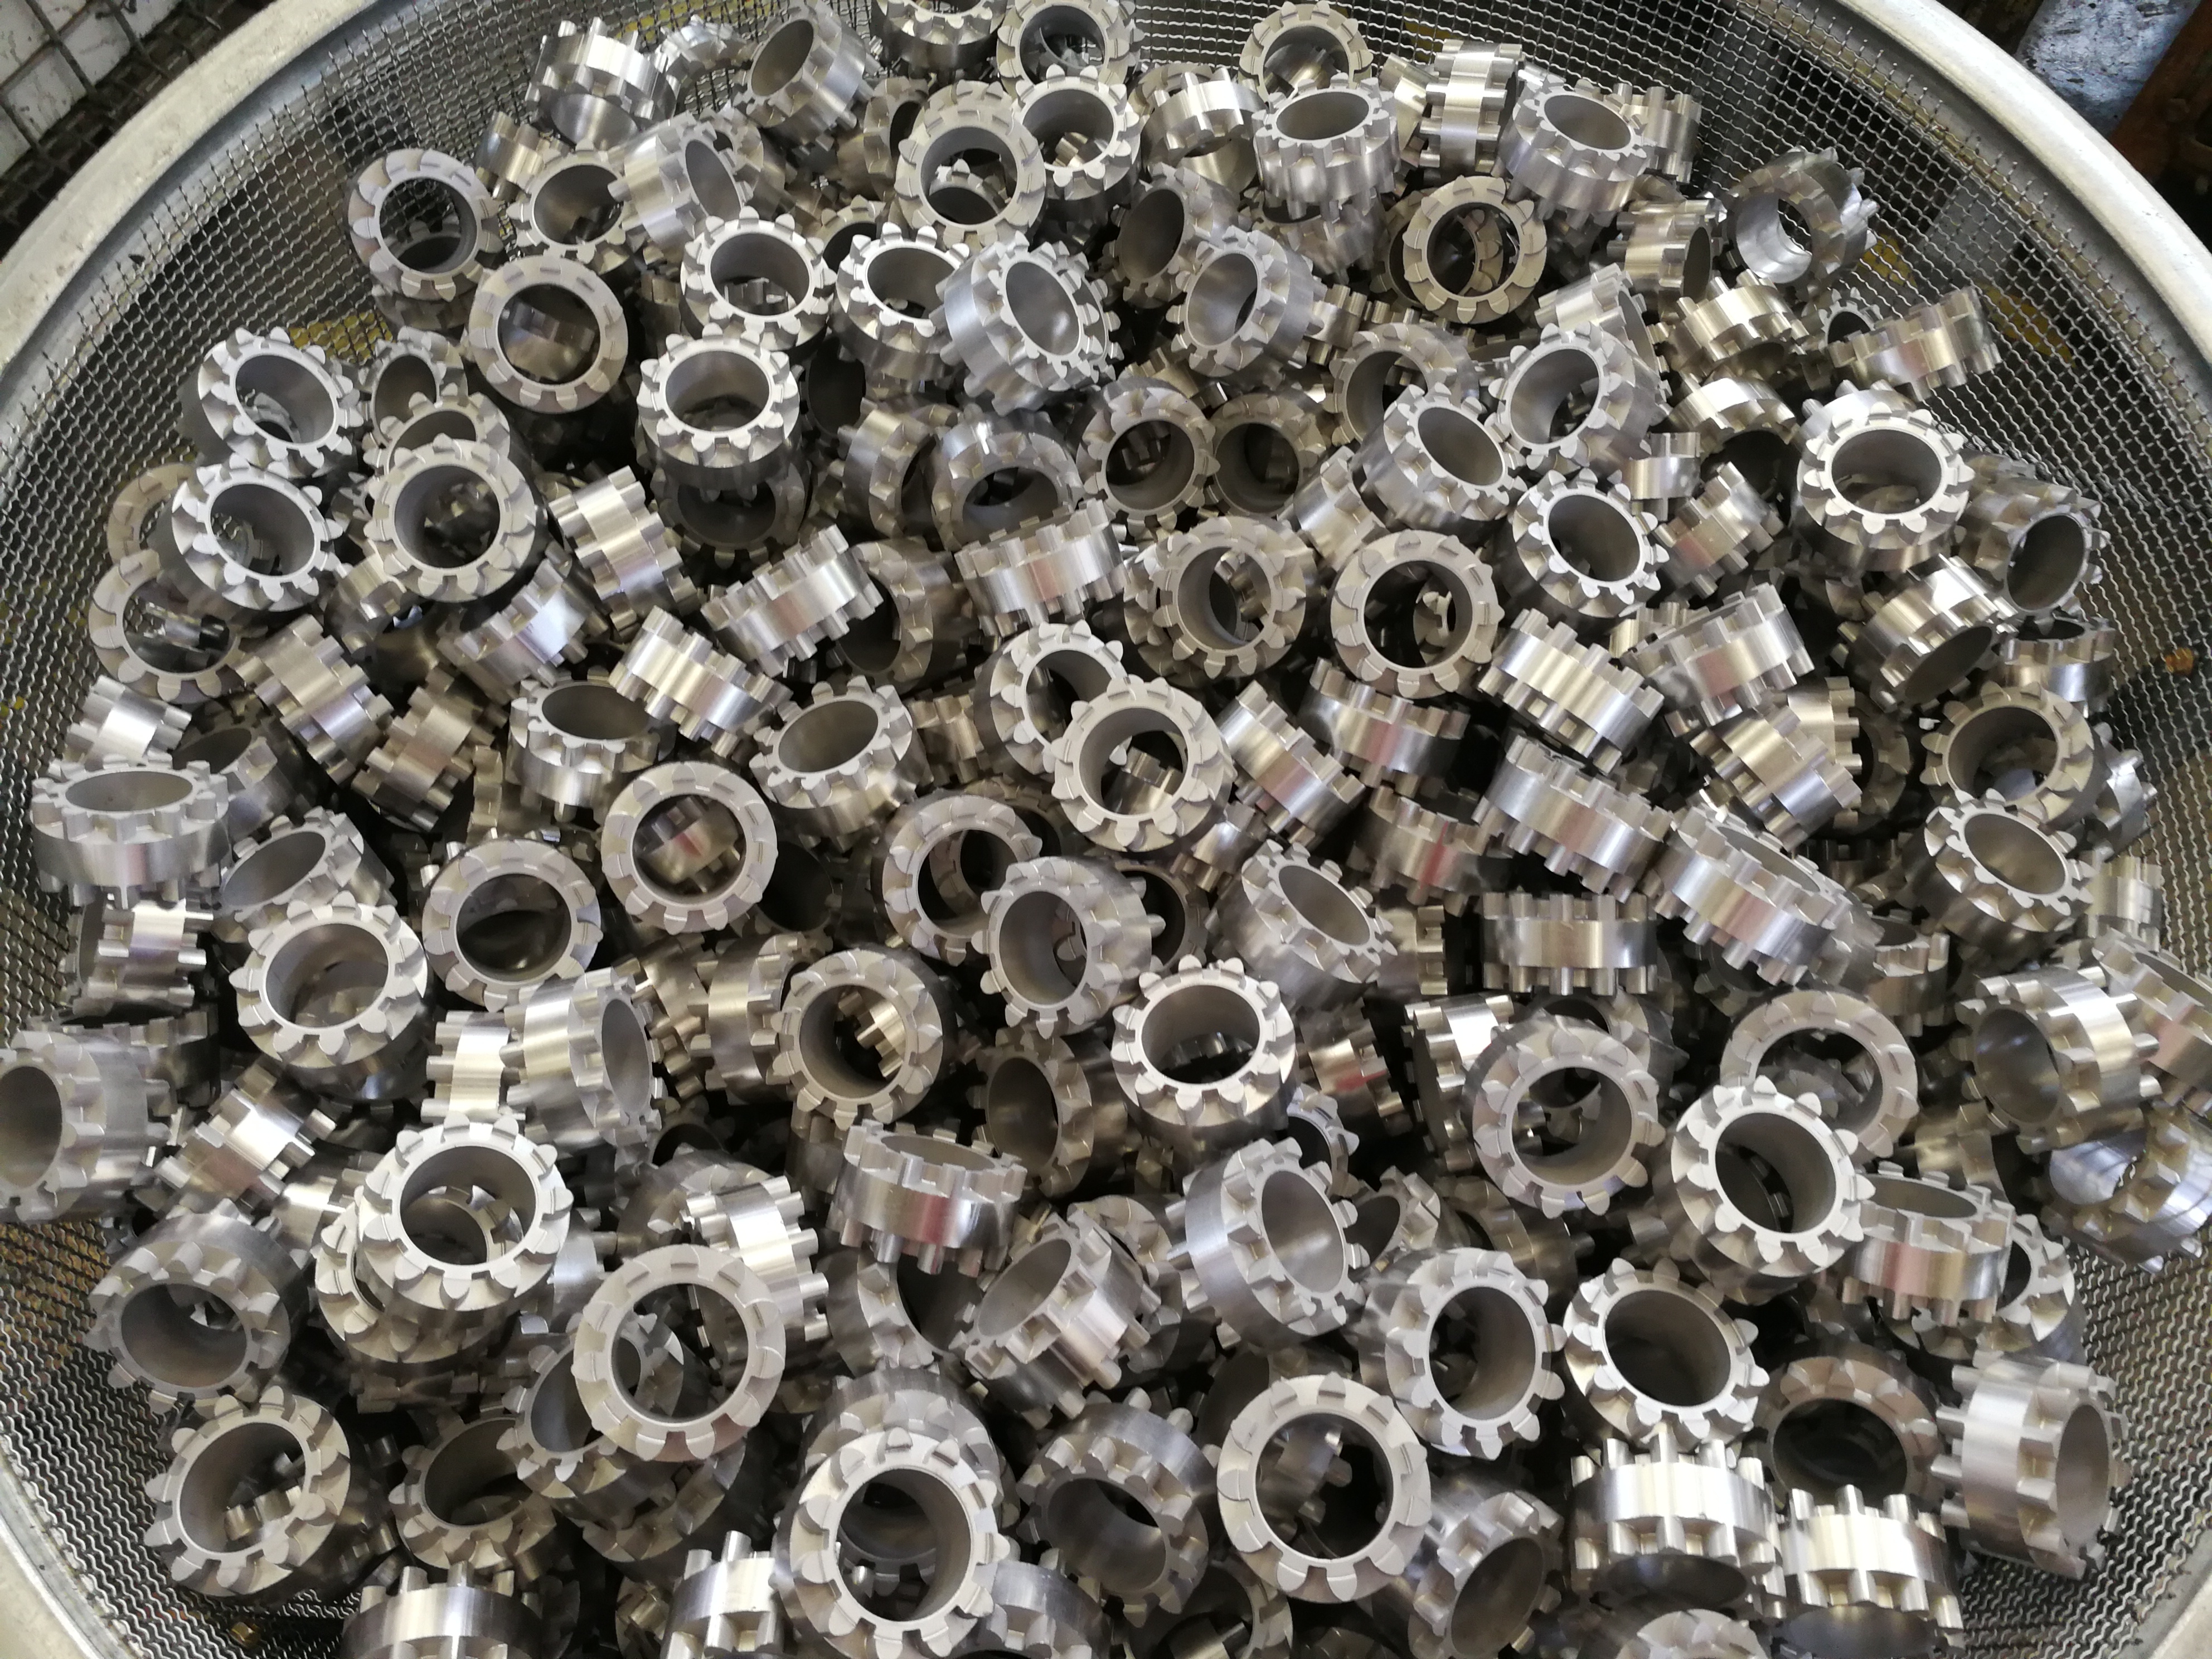 How to improve the hardness of powder metallurgy gears